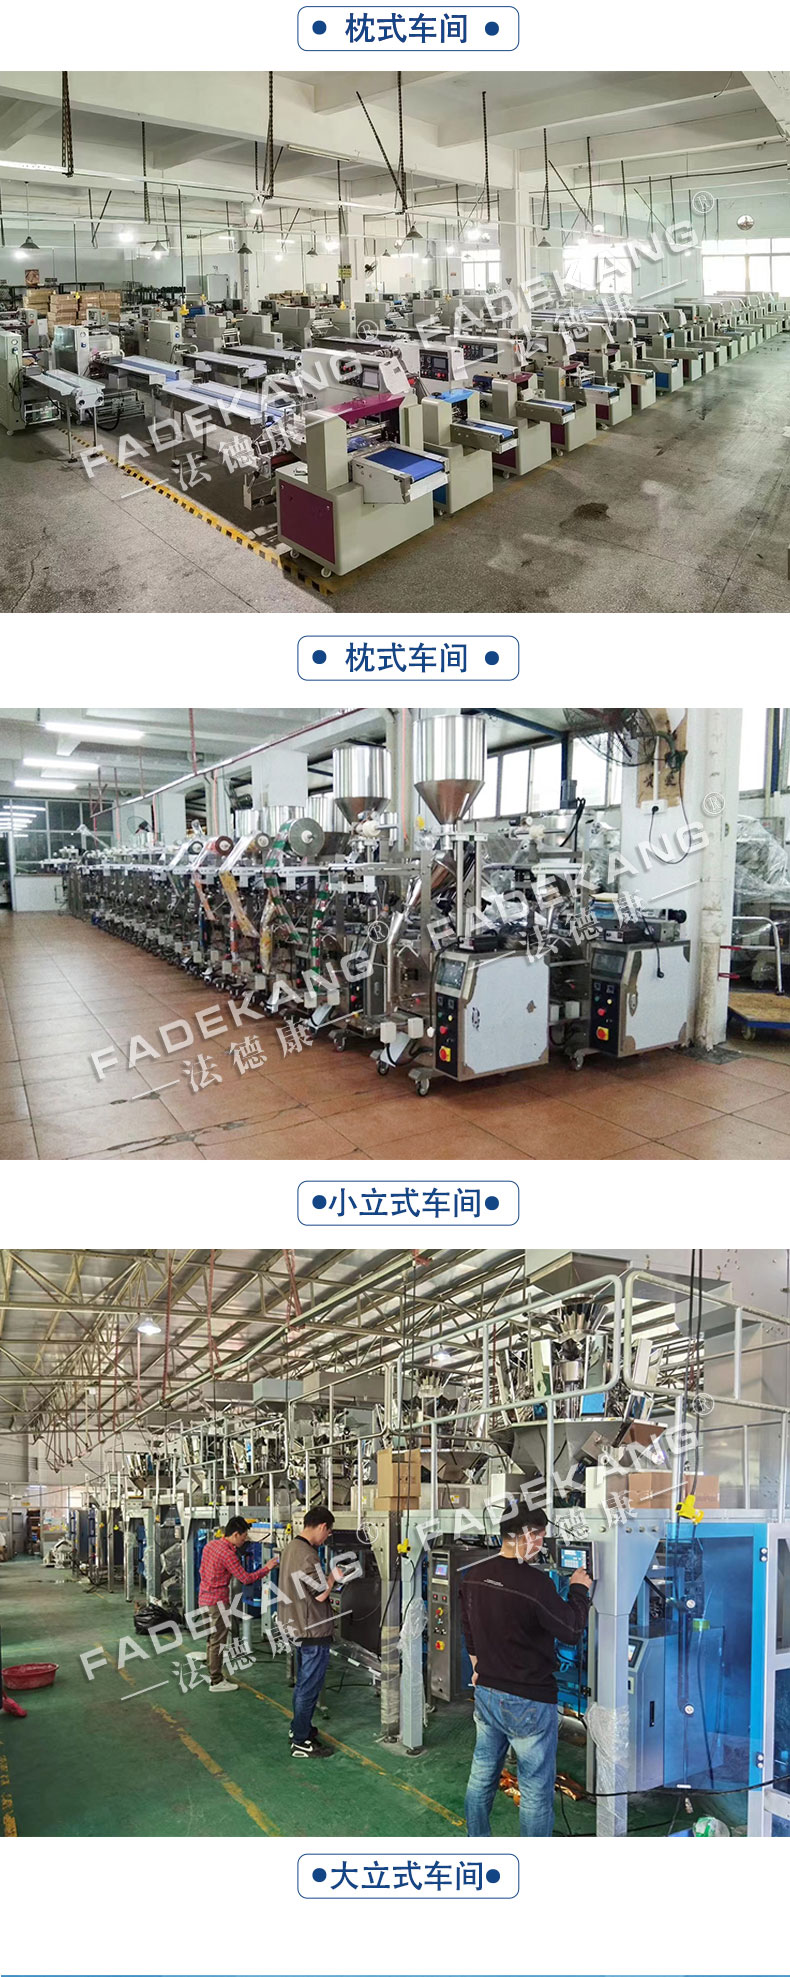 Fadekang baking soda cleaning agent packaging machine bag disinfection powder packaging machine fully automatic chemical powder filling machine